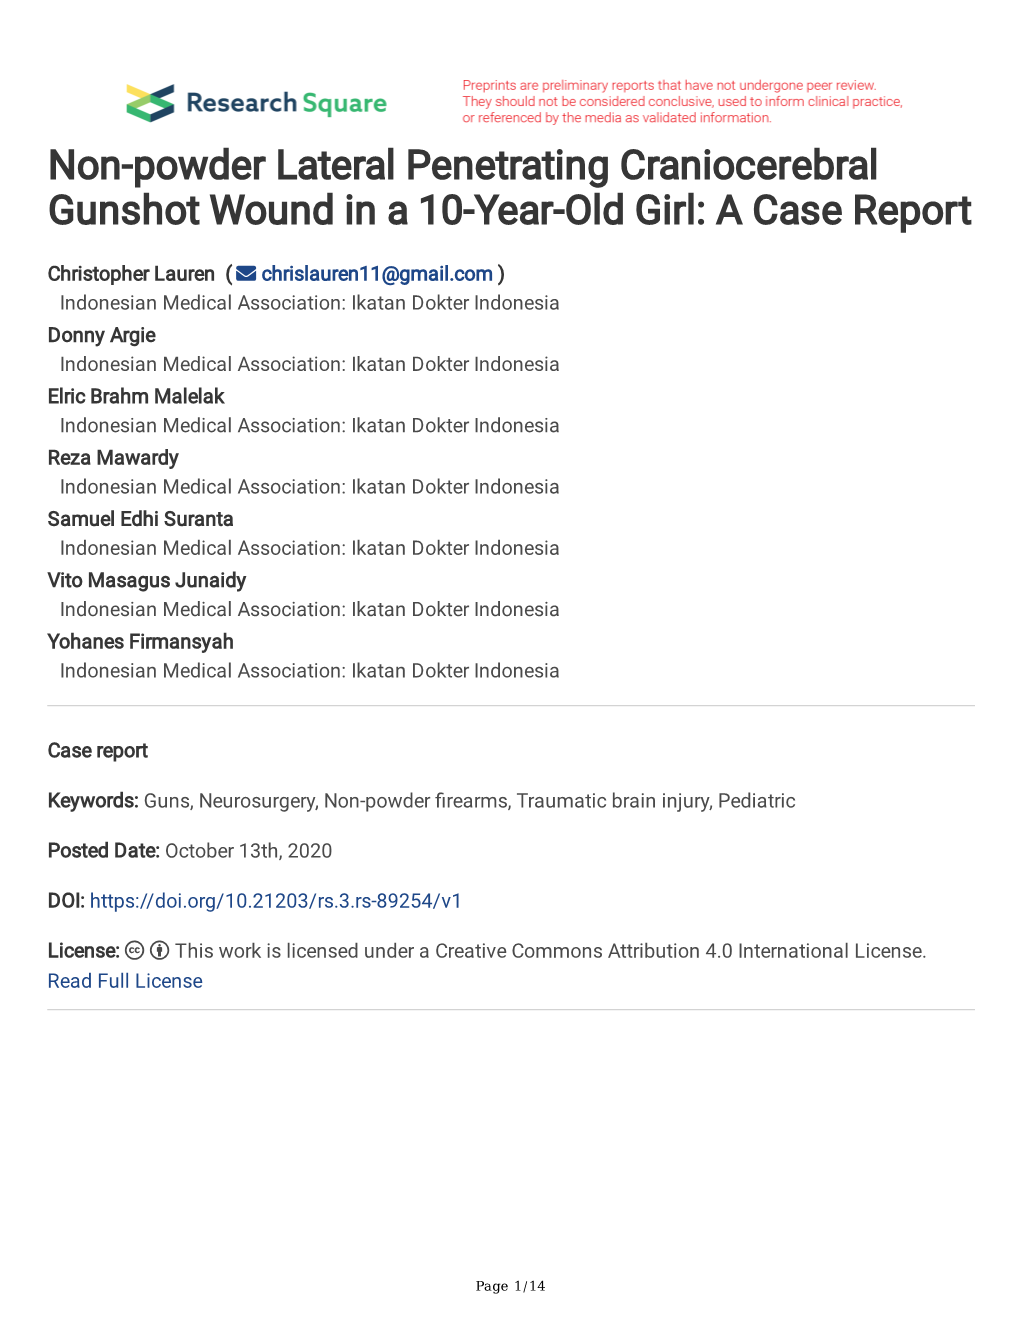 Non-Powder Lateral Penetrating Craniocerebral Gunshot Wound in a 10-Year-Old Girl: a Case Report